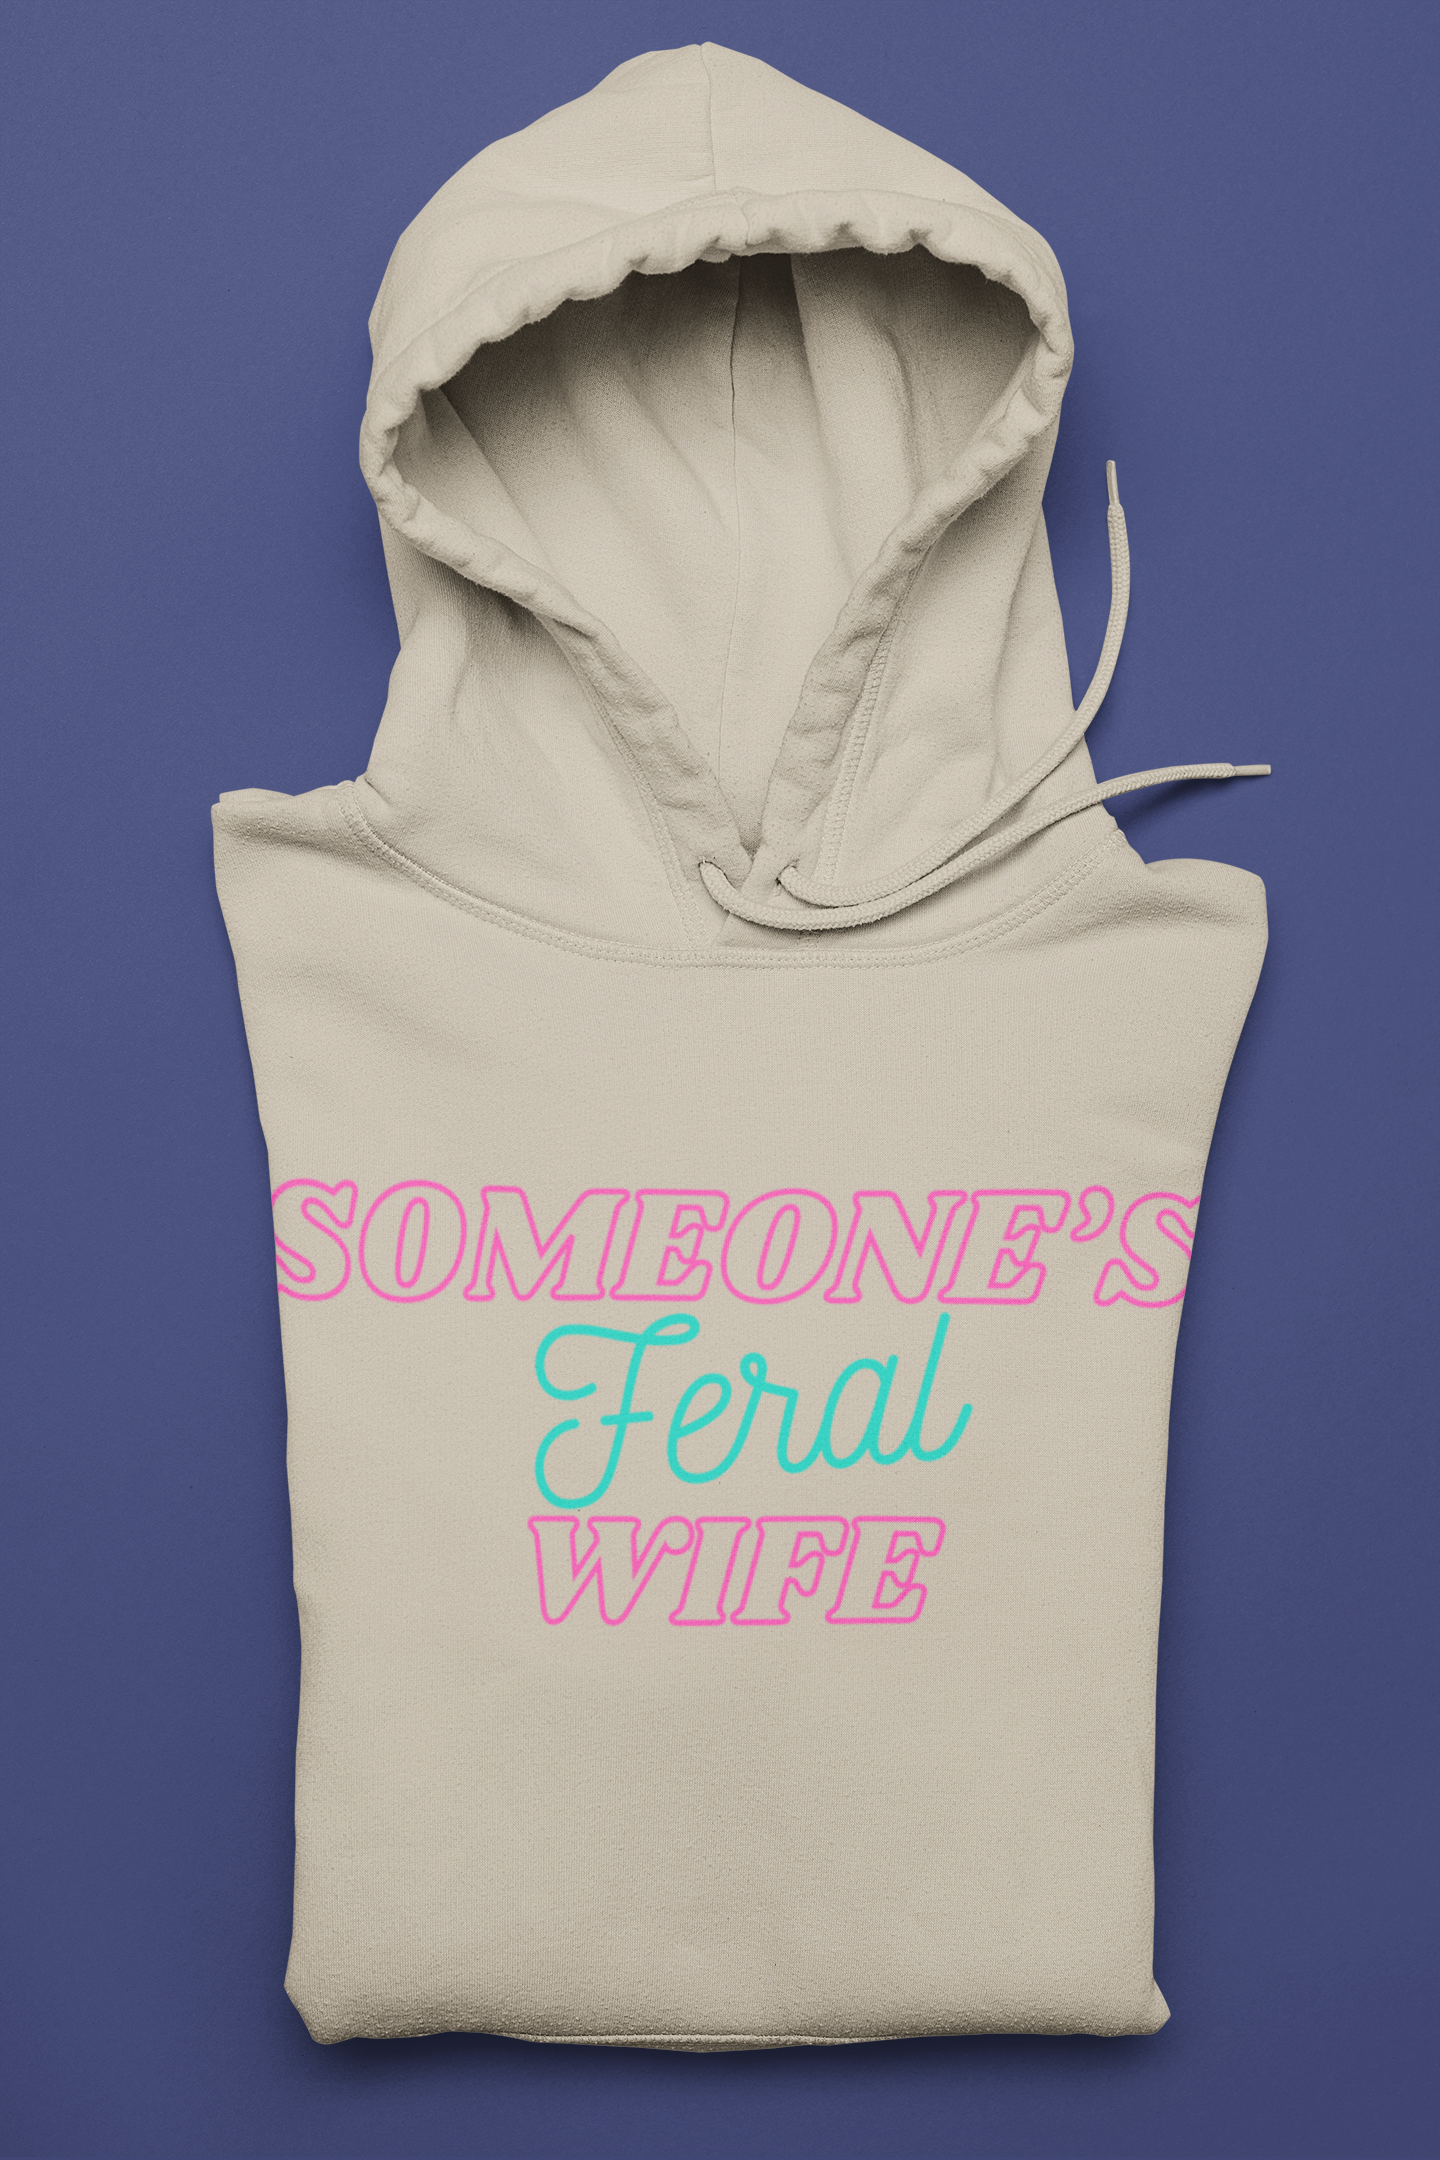 Someon's Feral Wife Hoodie